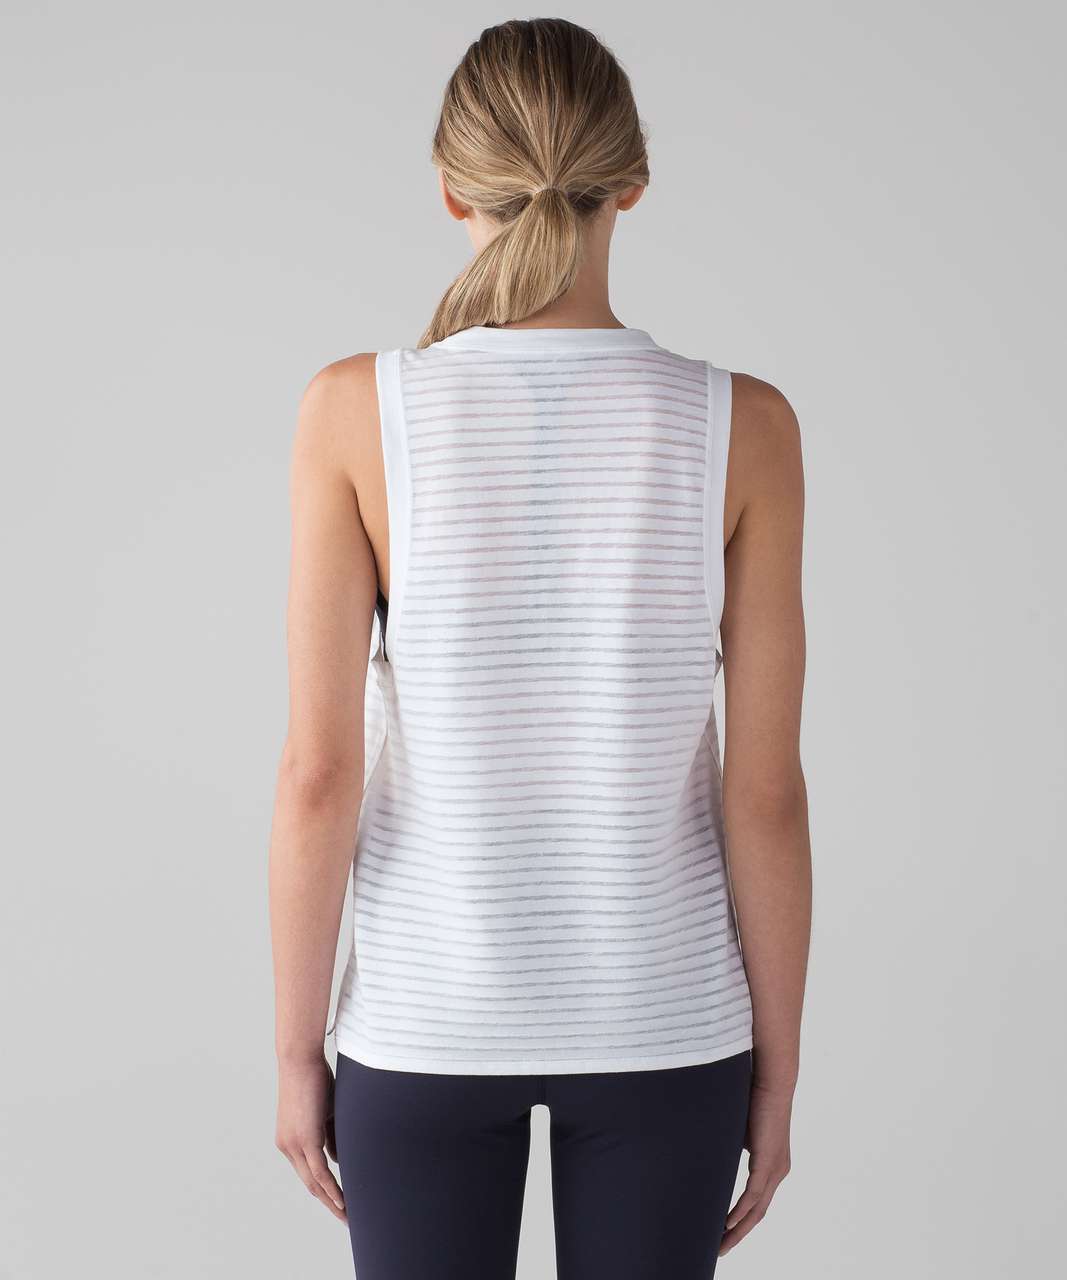 Lululemon Uncovered Muscle Tank - White